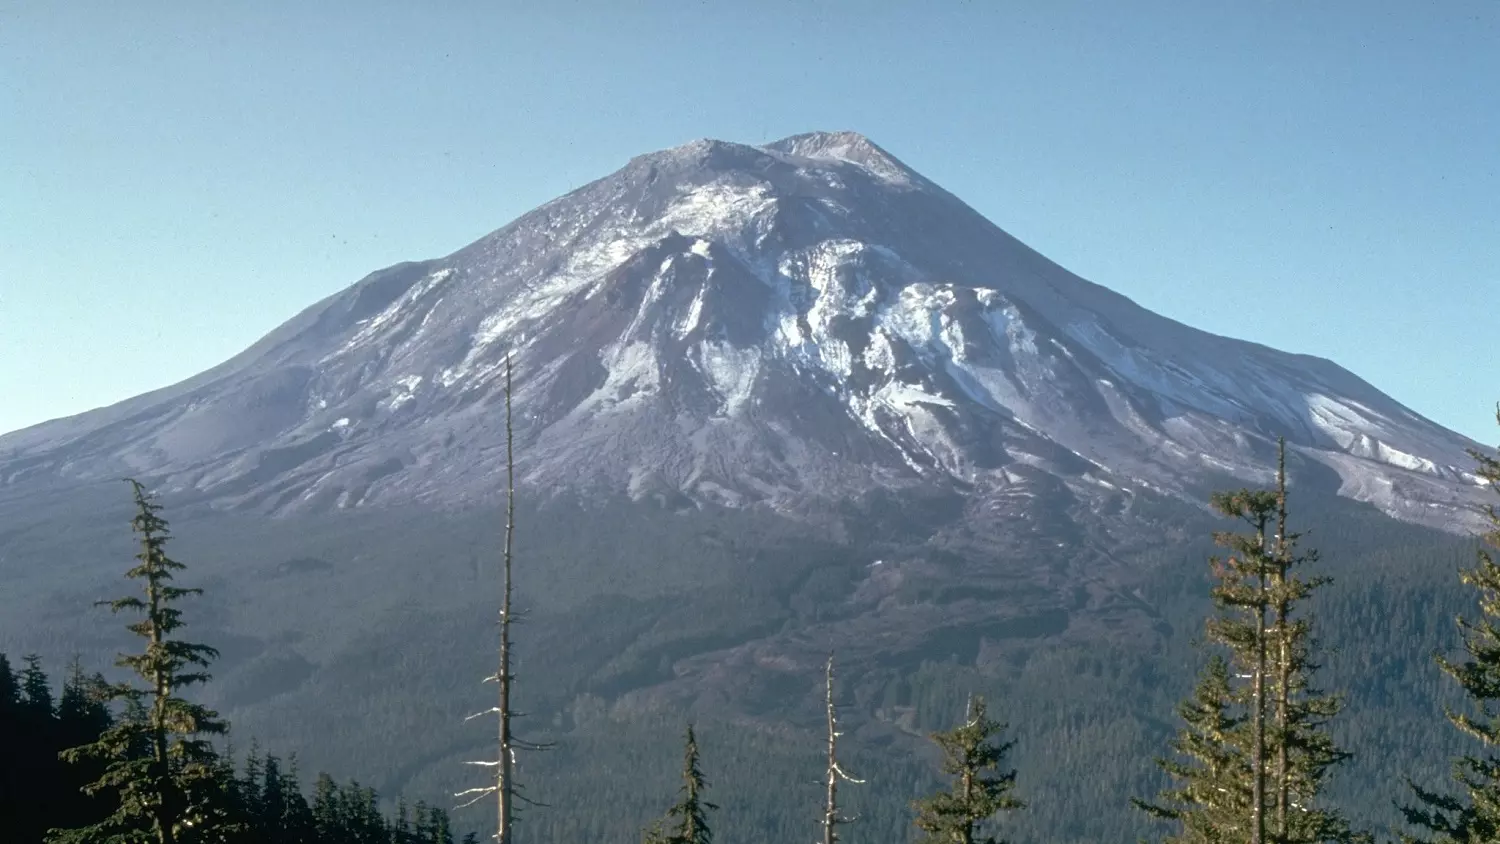 Mount St. Helens, May 17, 1980, photo credit: USGS